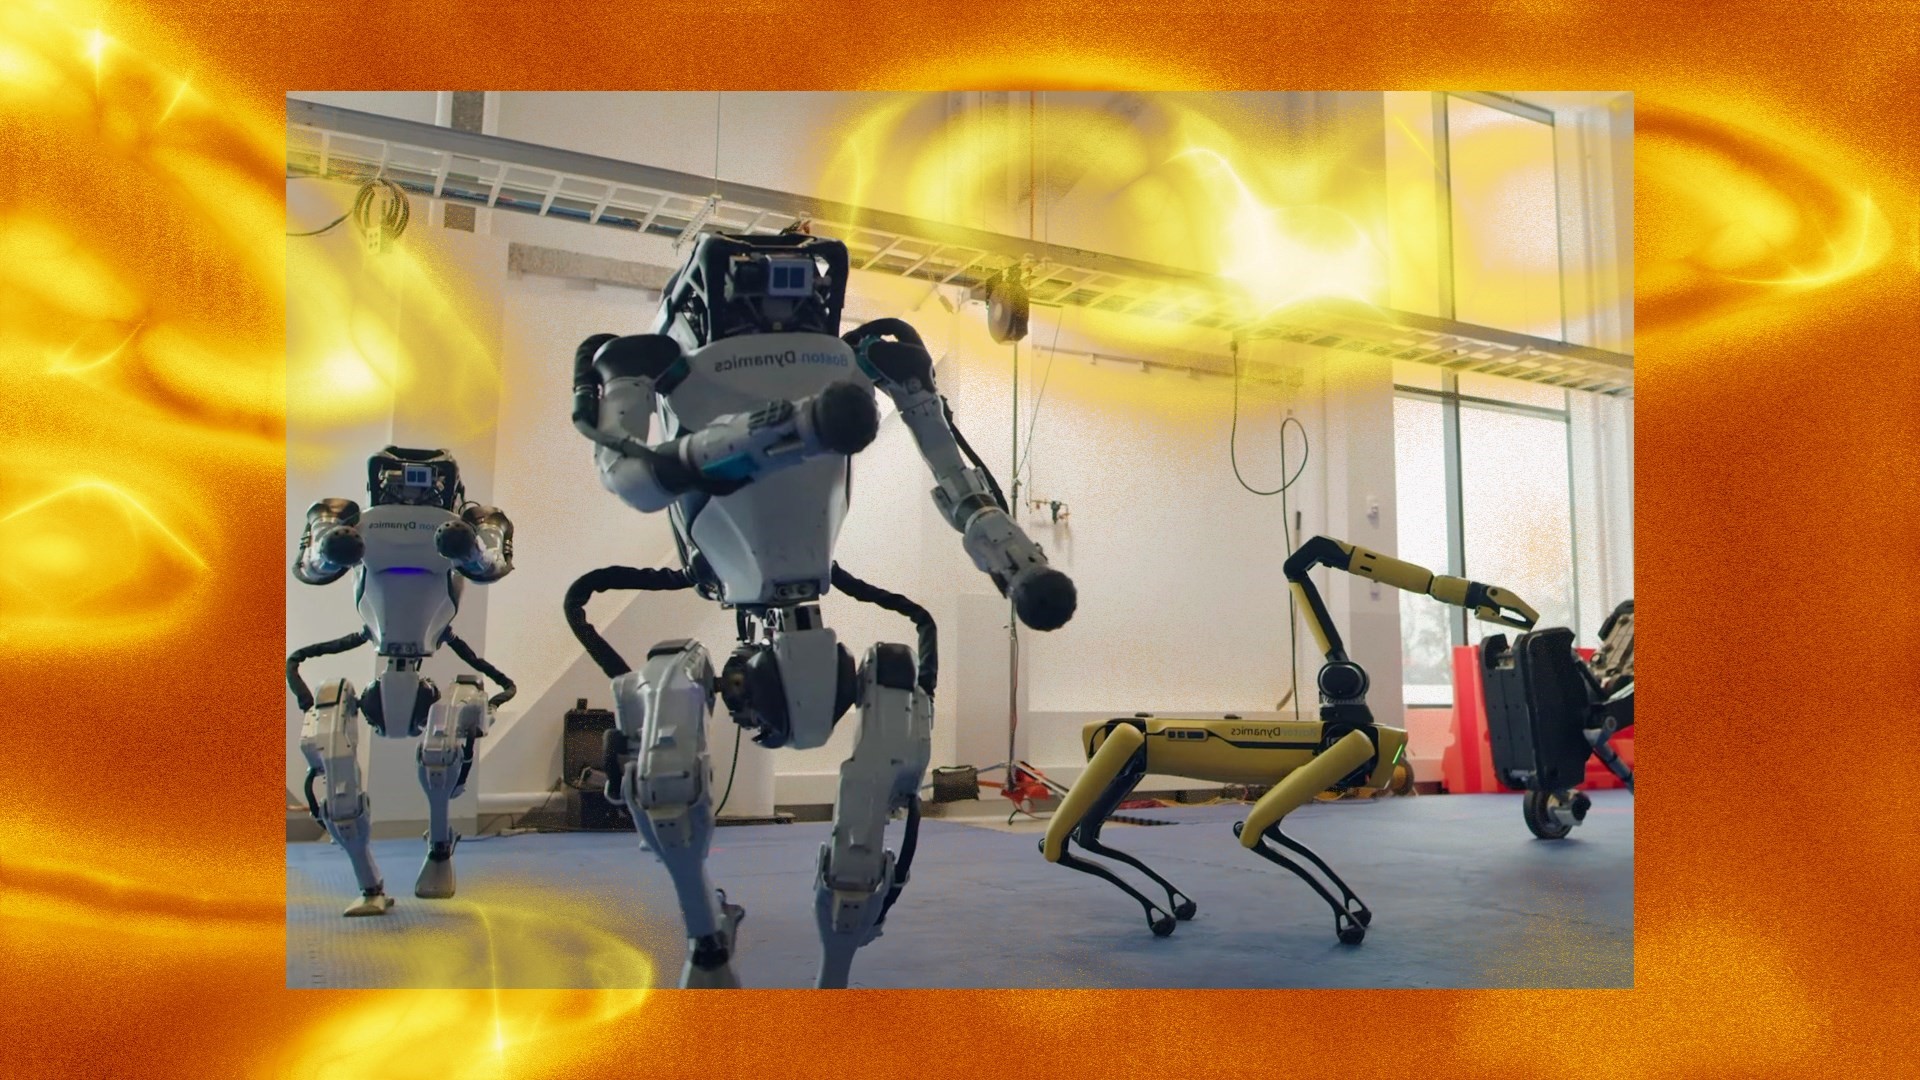 How soon until Boston Dynamics' viral robot dogs the |